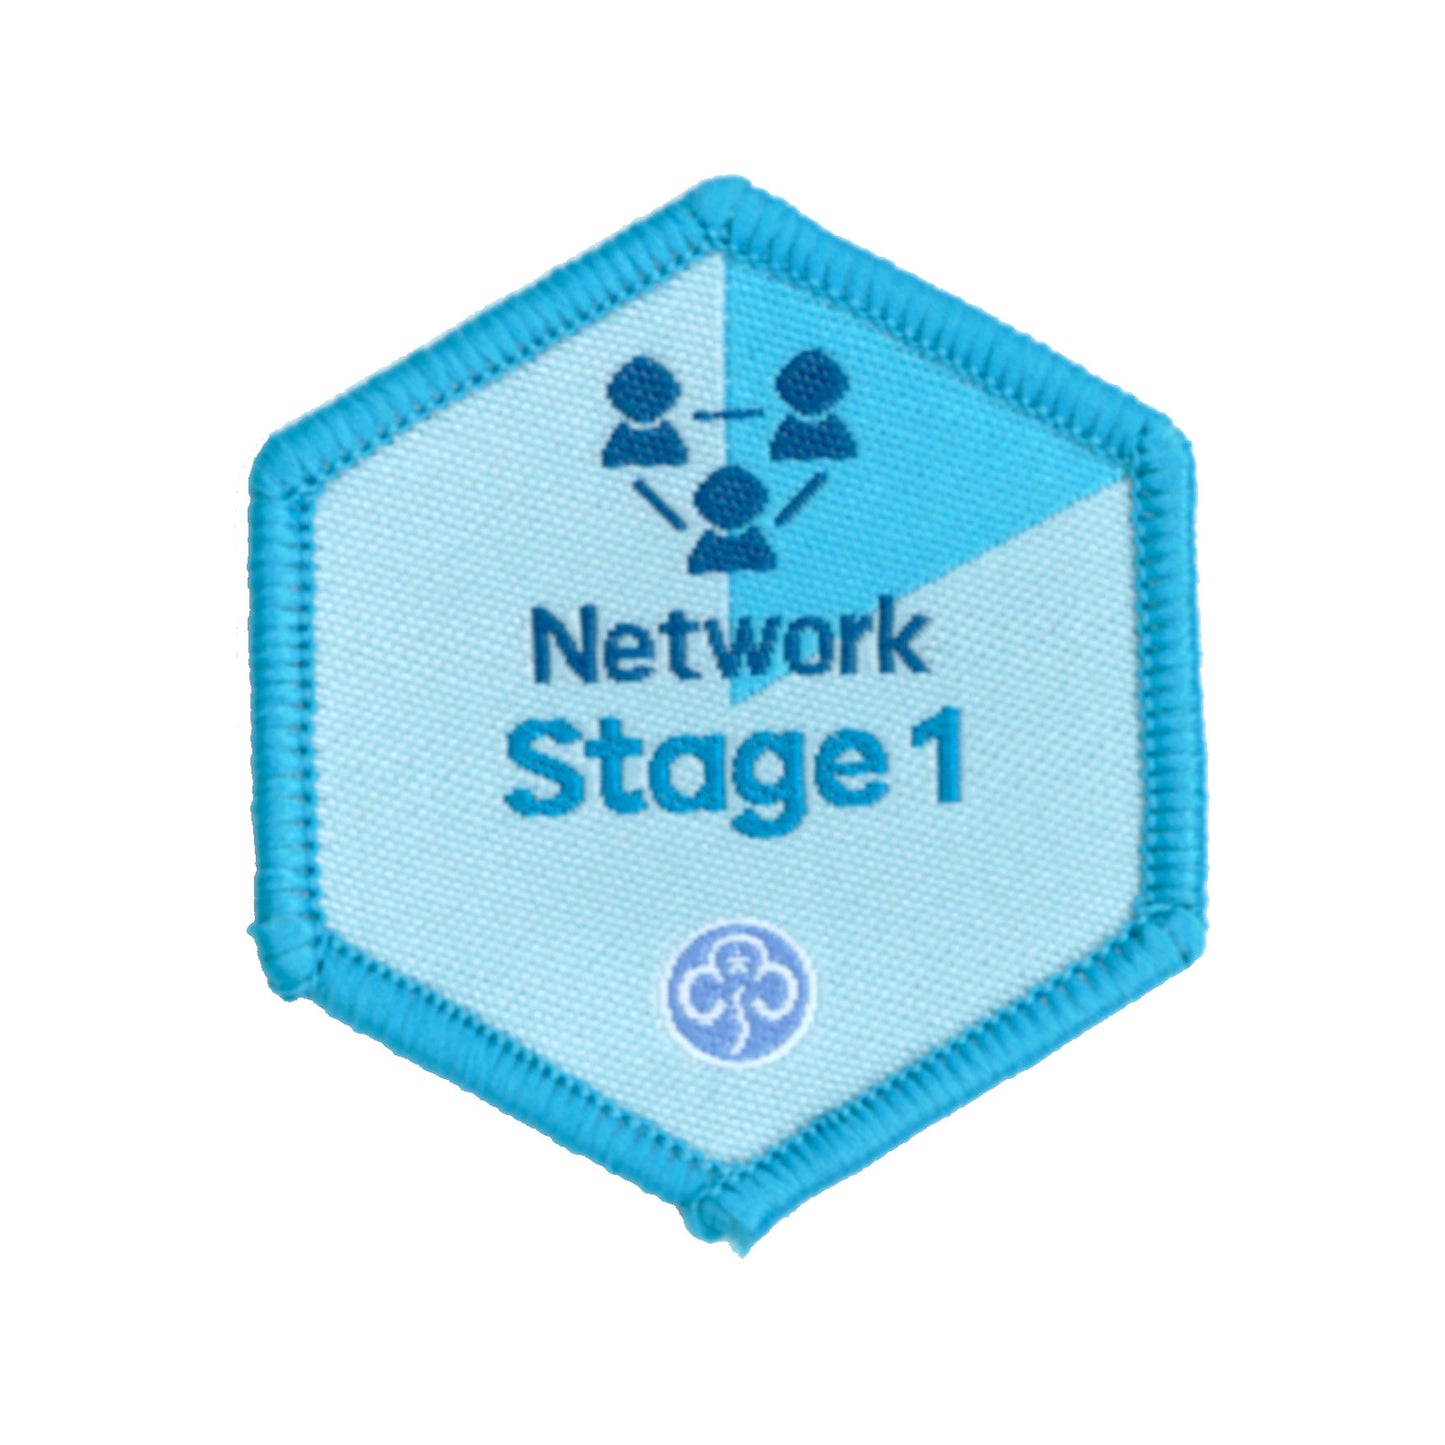 Skills Builder - Know Myself - Network Stage 1 Woven Badge